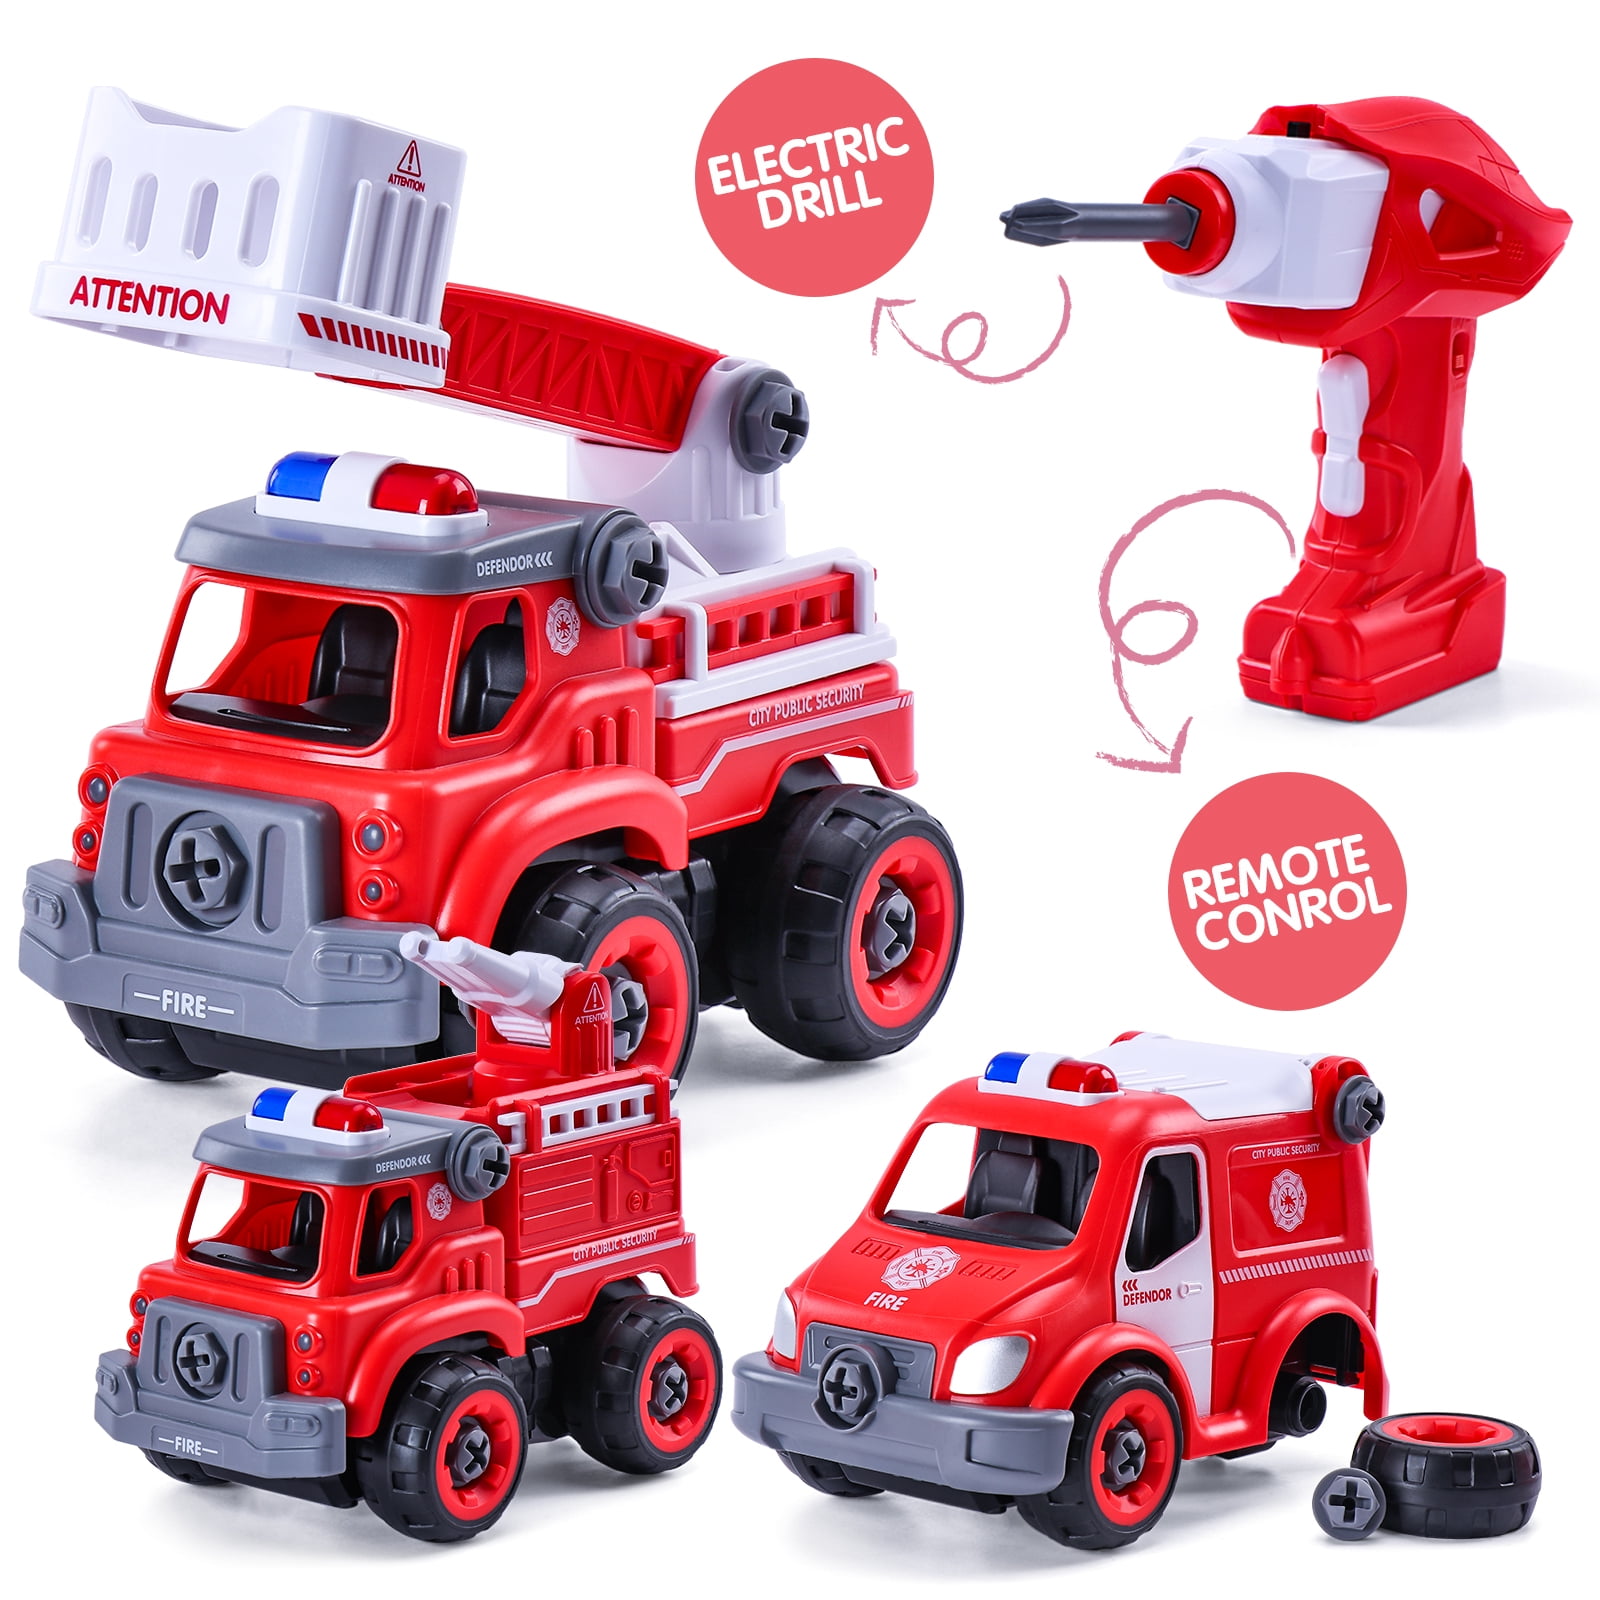 NEW Take Apart Toys Remote Control Construction Truck for Boys RC Car STEM Toy